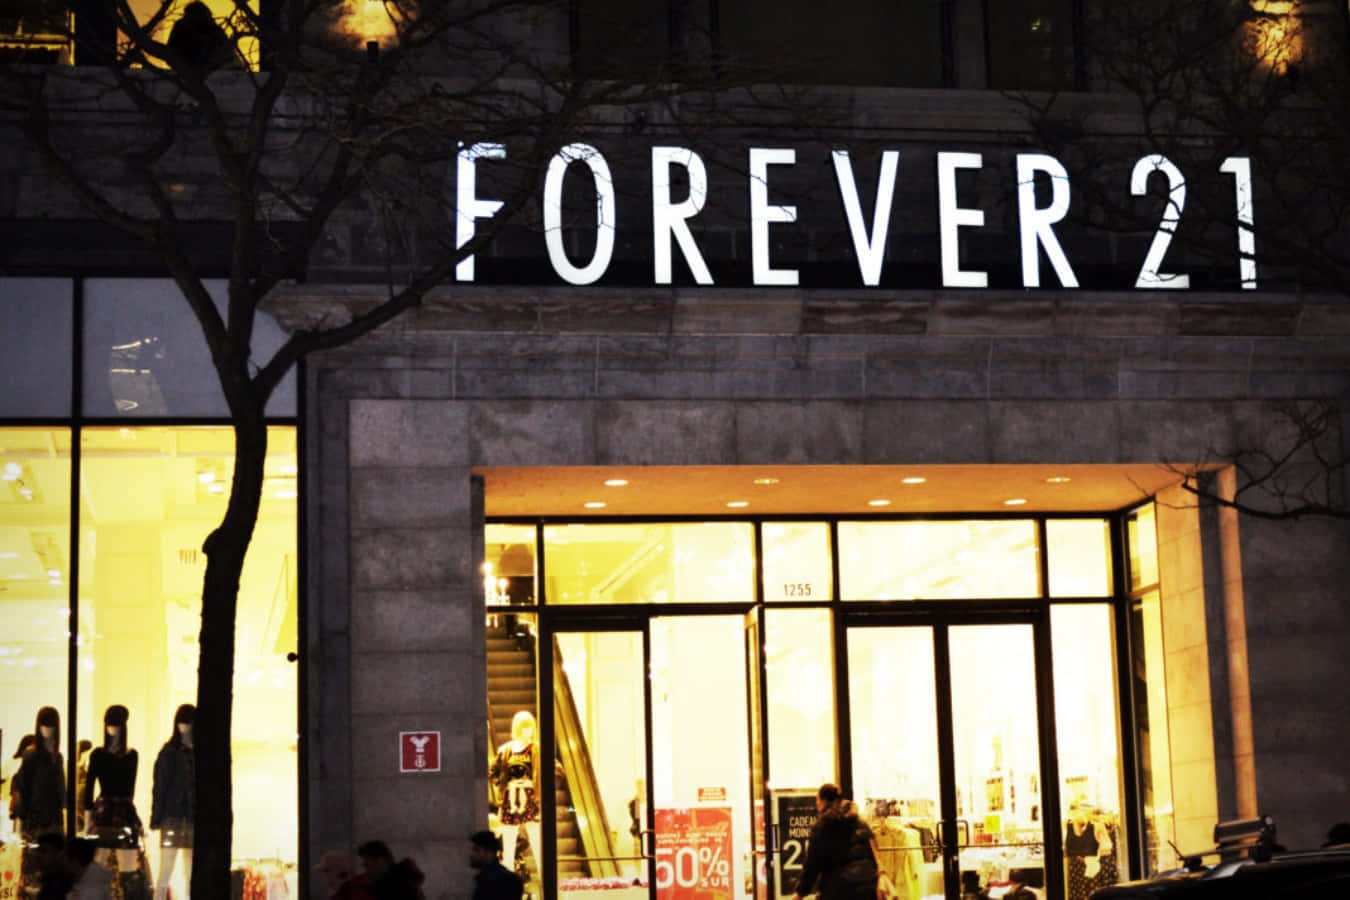 [100+] Forever 21 Pictures | Wallpapers.com